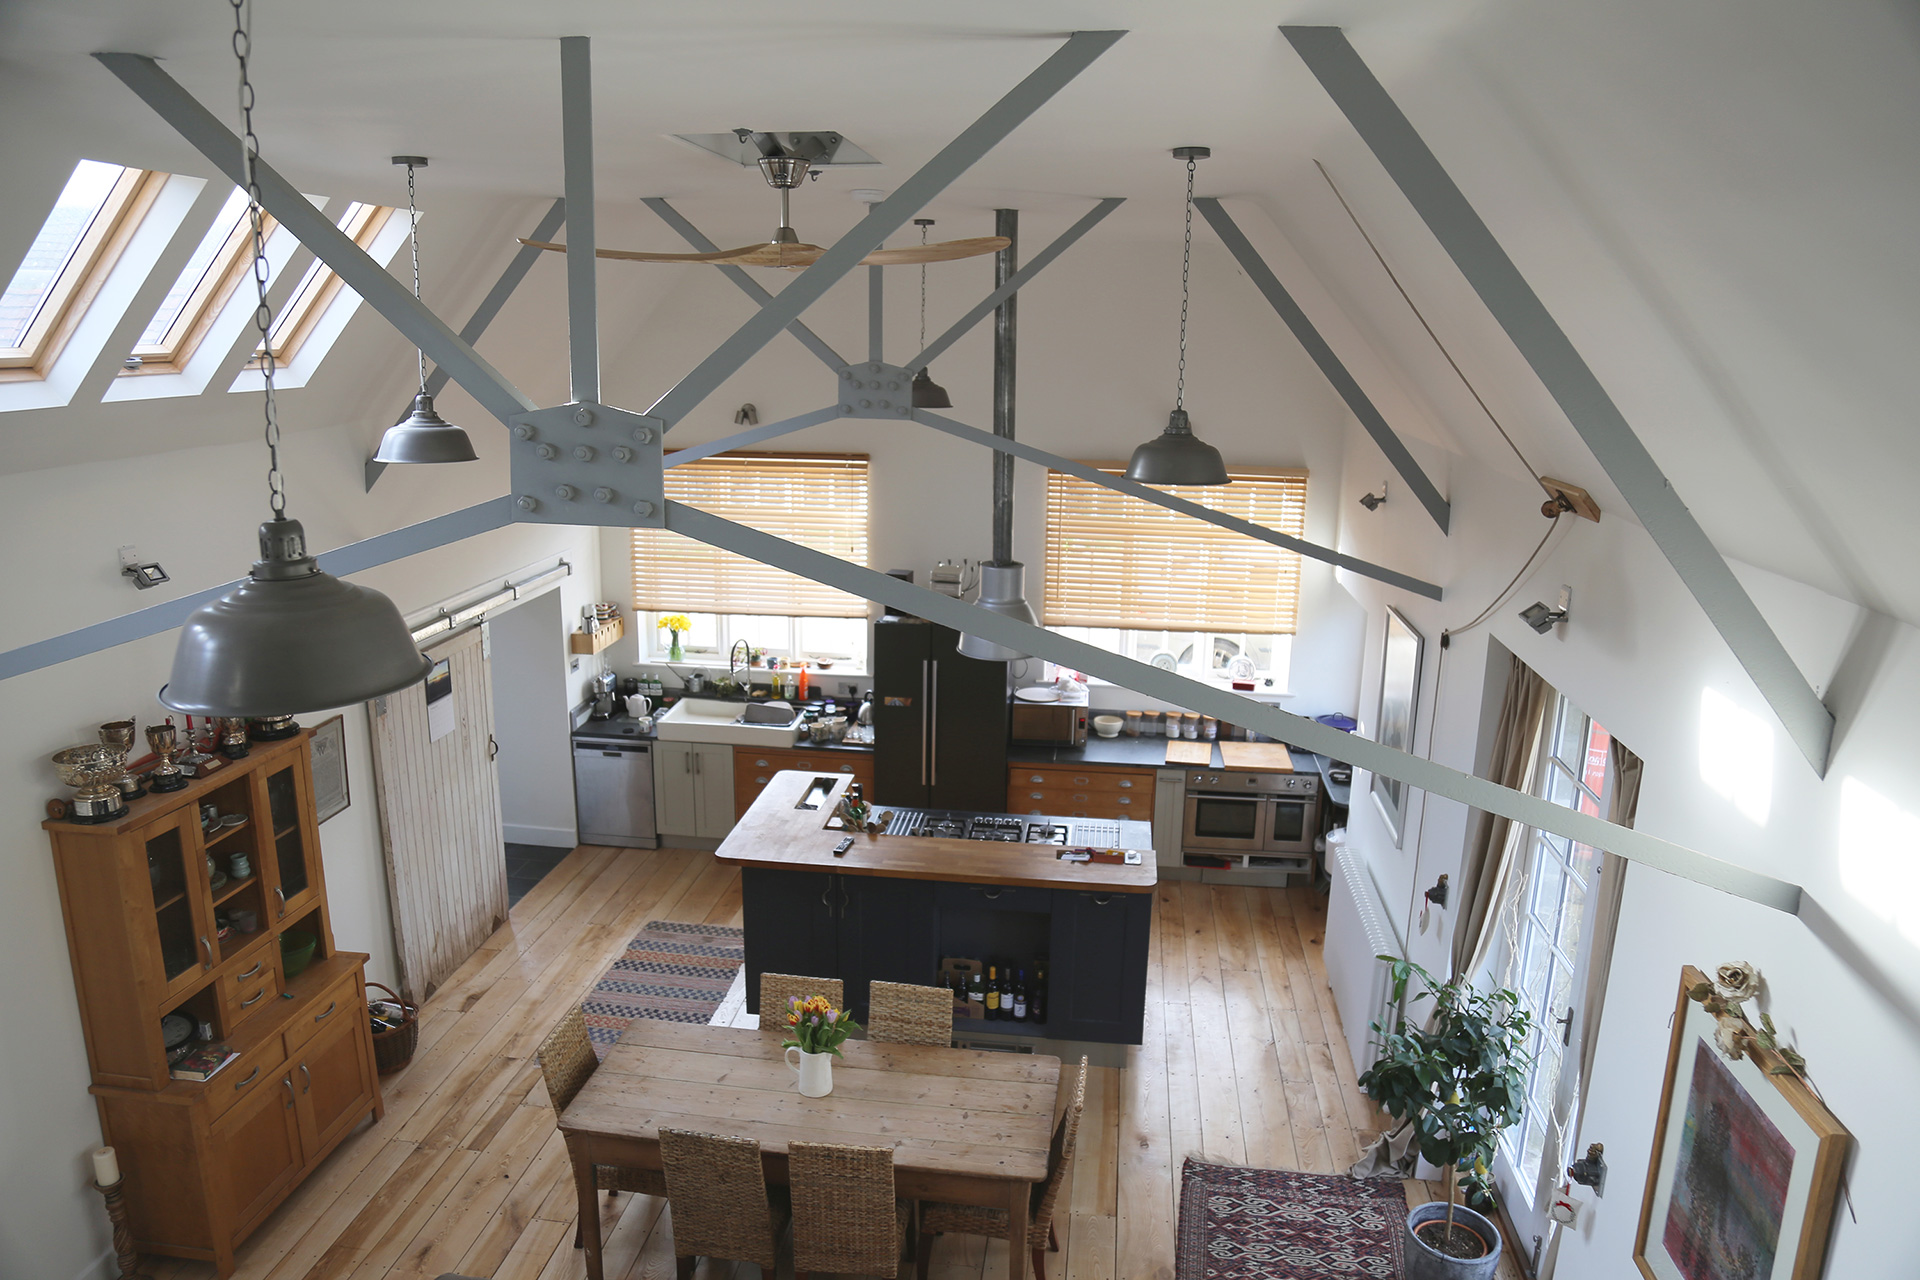 aerial internal view from mezzanine level of large kitchen and dining space with exposed beams